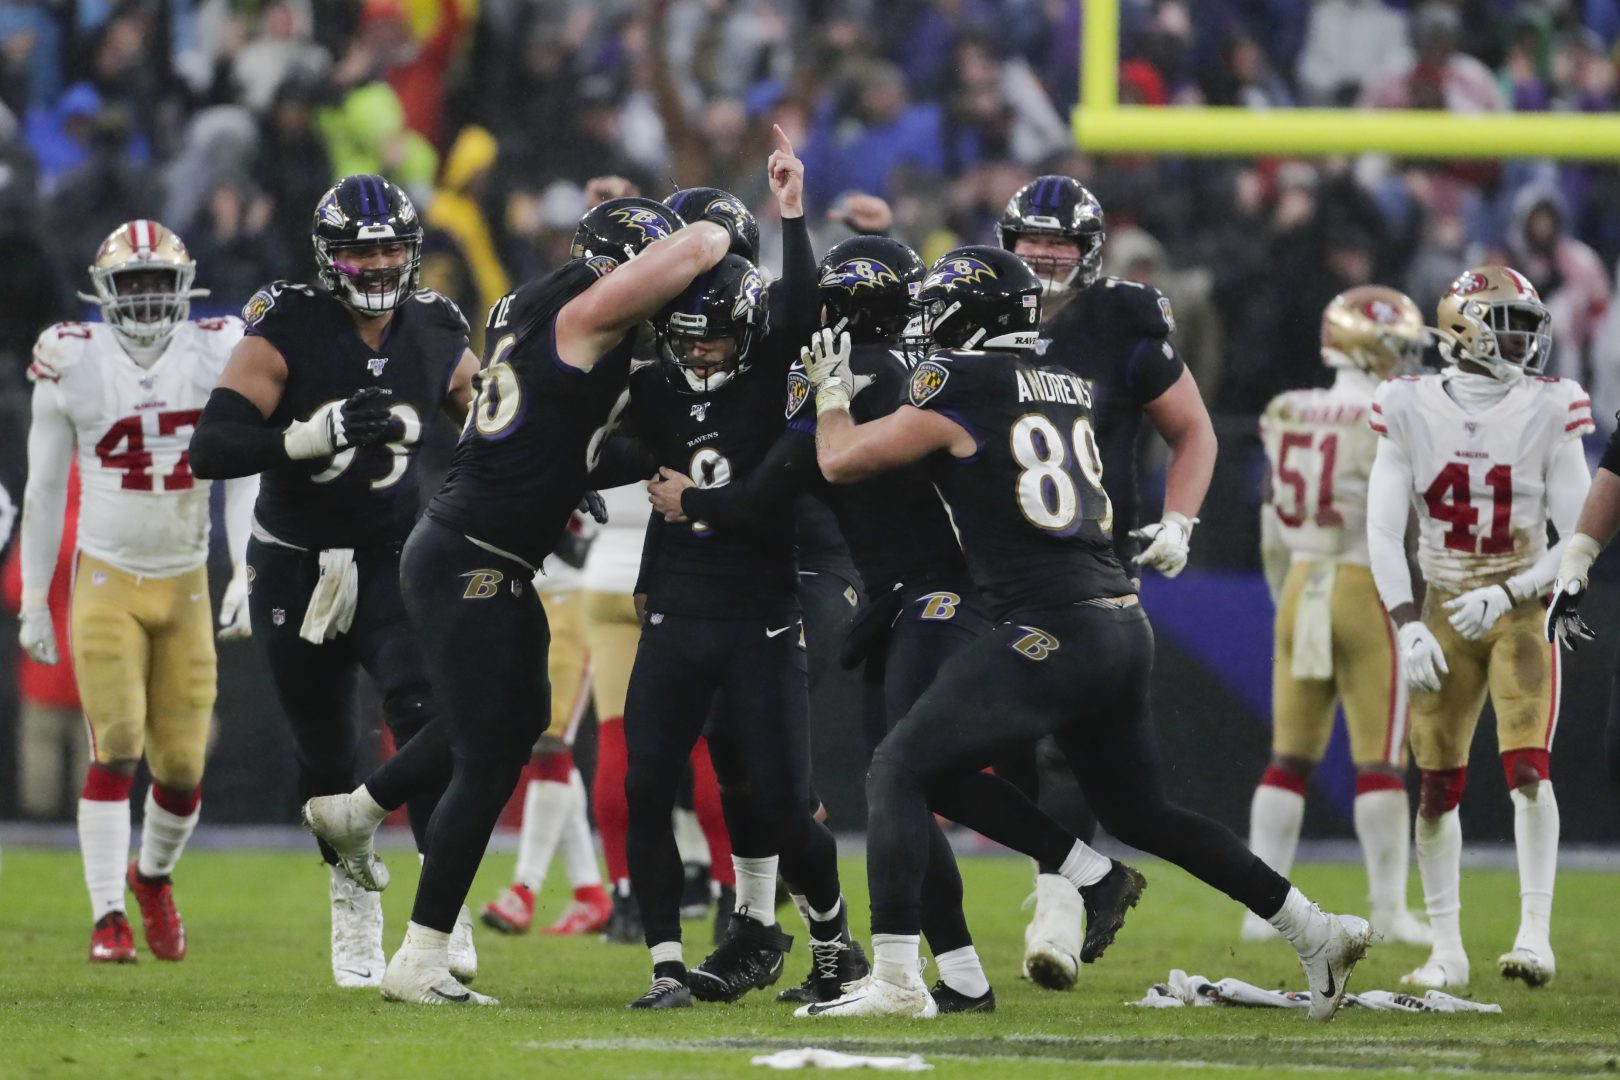 Baltimore Ravens kicker Justin Tucker (9) is surrounded by teammates after kicking the winning field goal against the San Francisco 49ers in the second half of an NFL football game, Sunday, Dec. 1, 2019, in Baltimore, Md. Ravens won 20-17. 